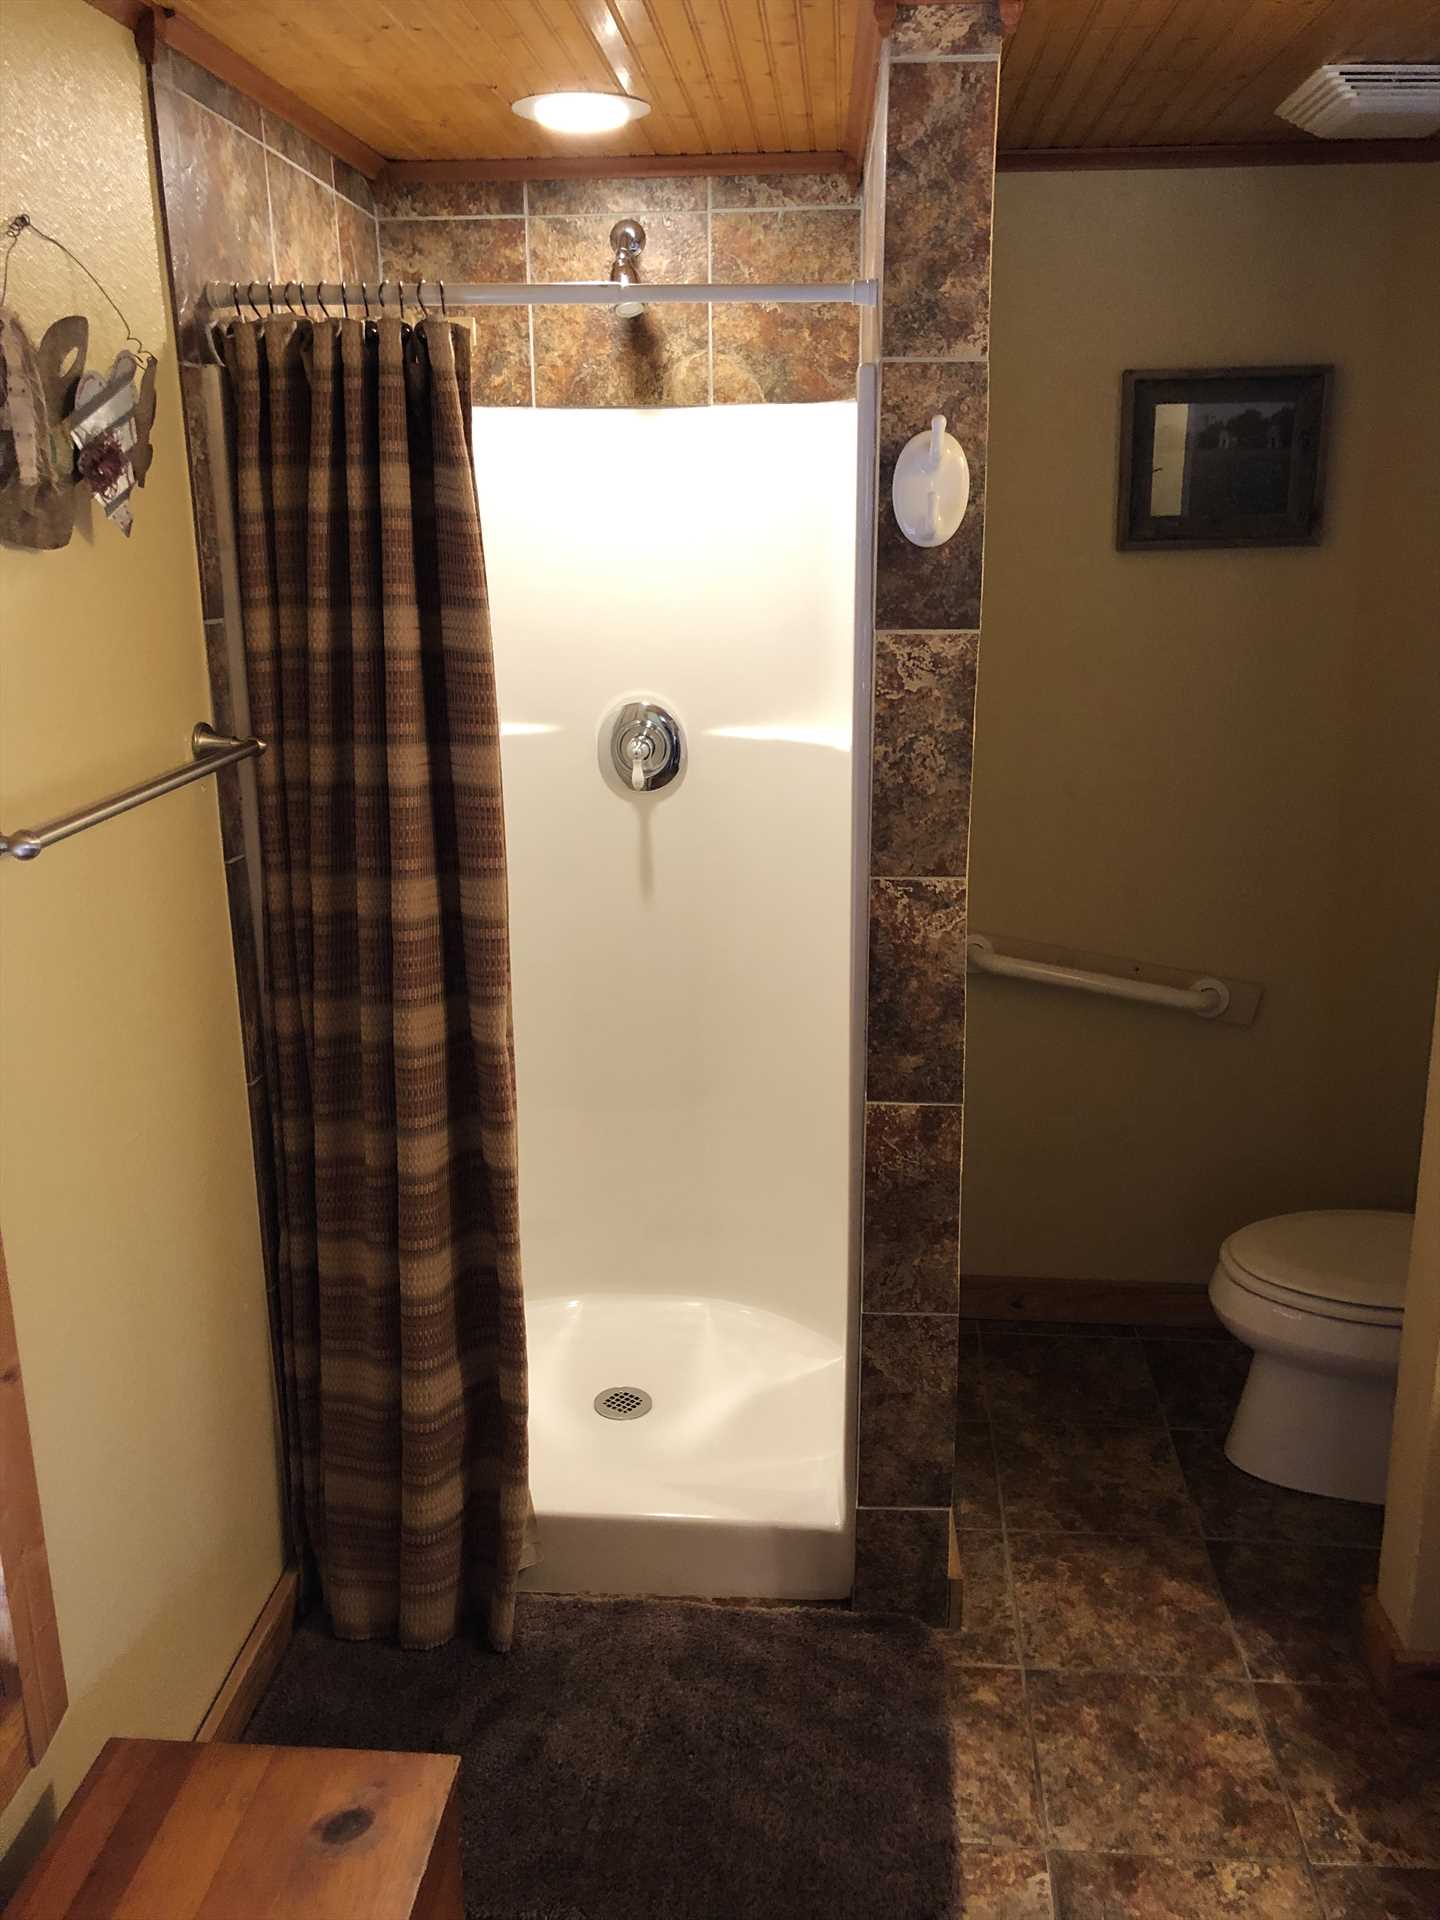                                                 Your full bath here is spotlessly clean, and features a shower and plenty of clean linens.